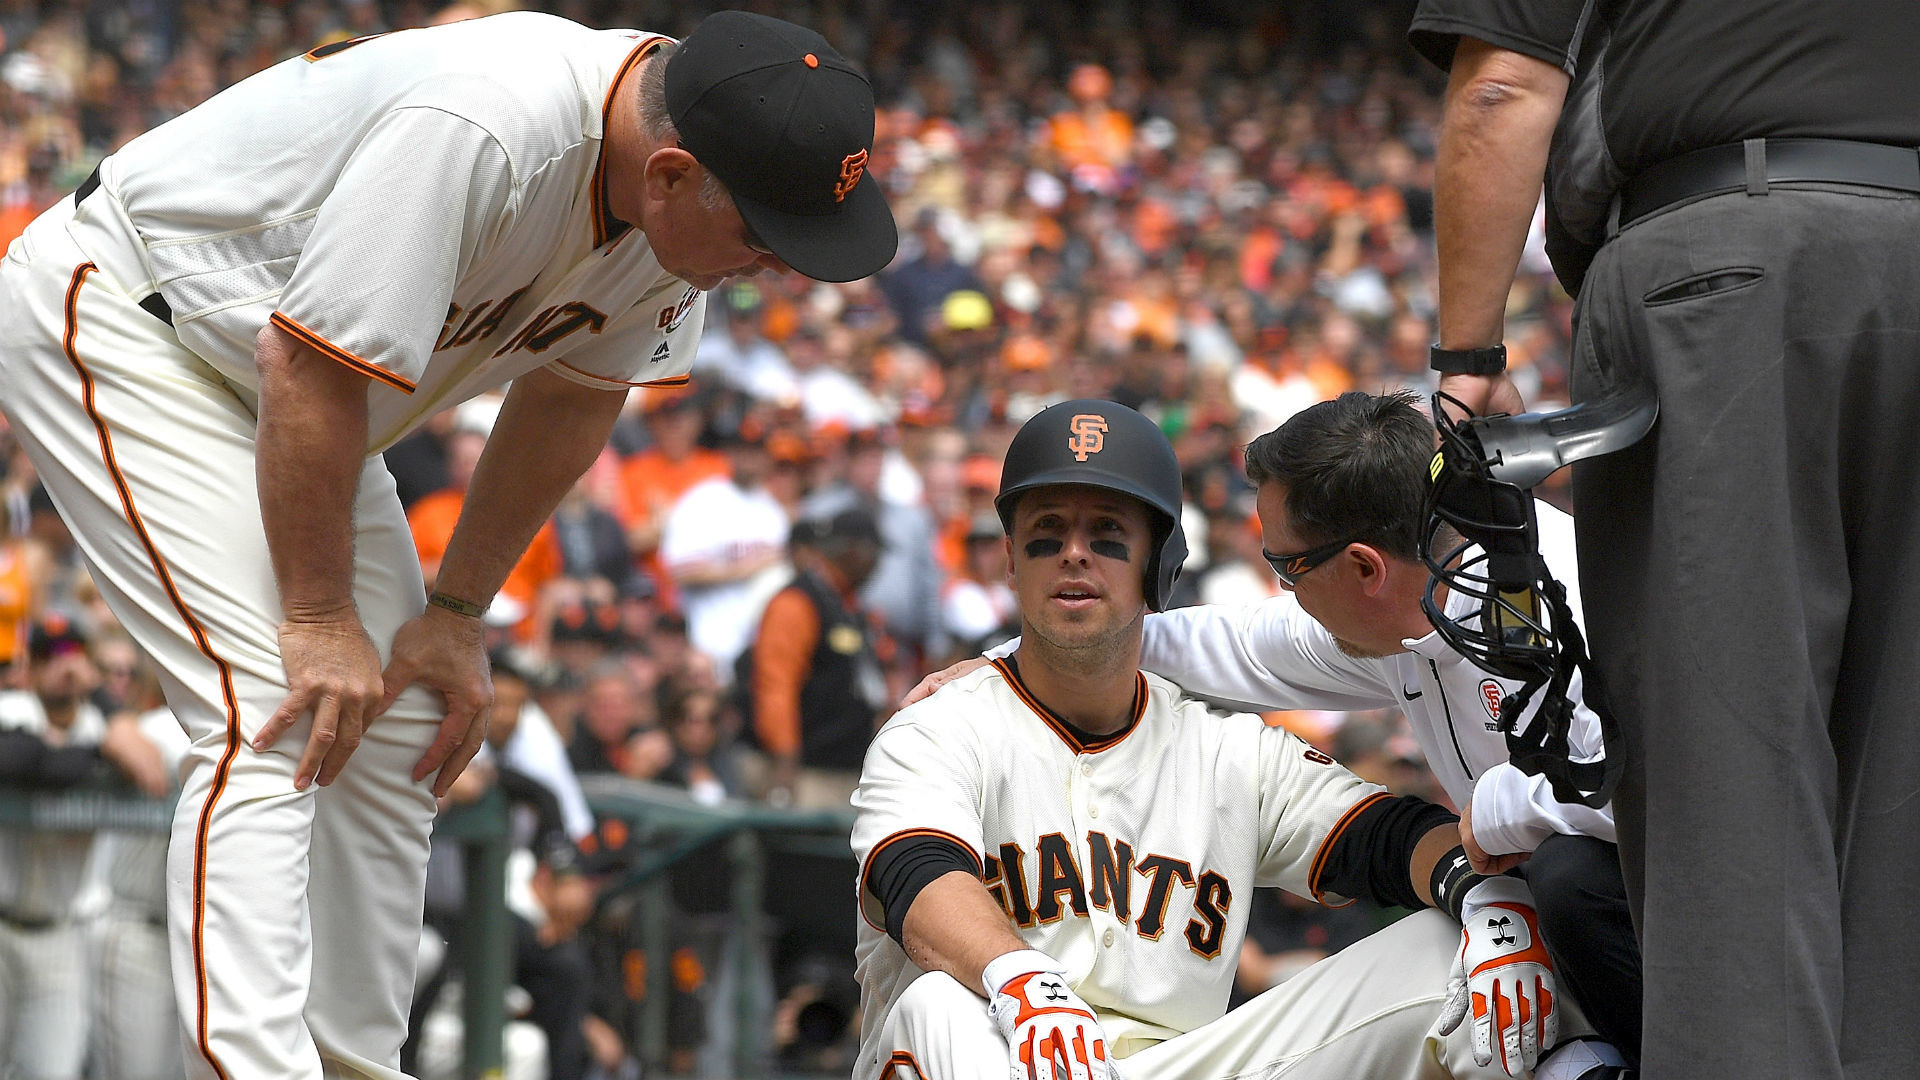 1920x1080 Giants place Buster Posey on DL after fastball to helmet MLB Spor...